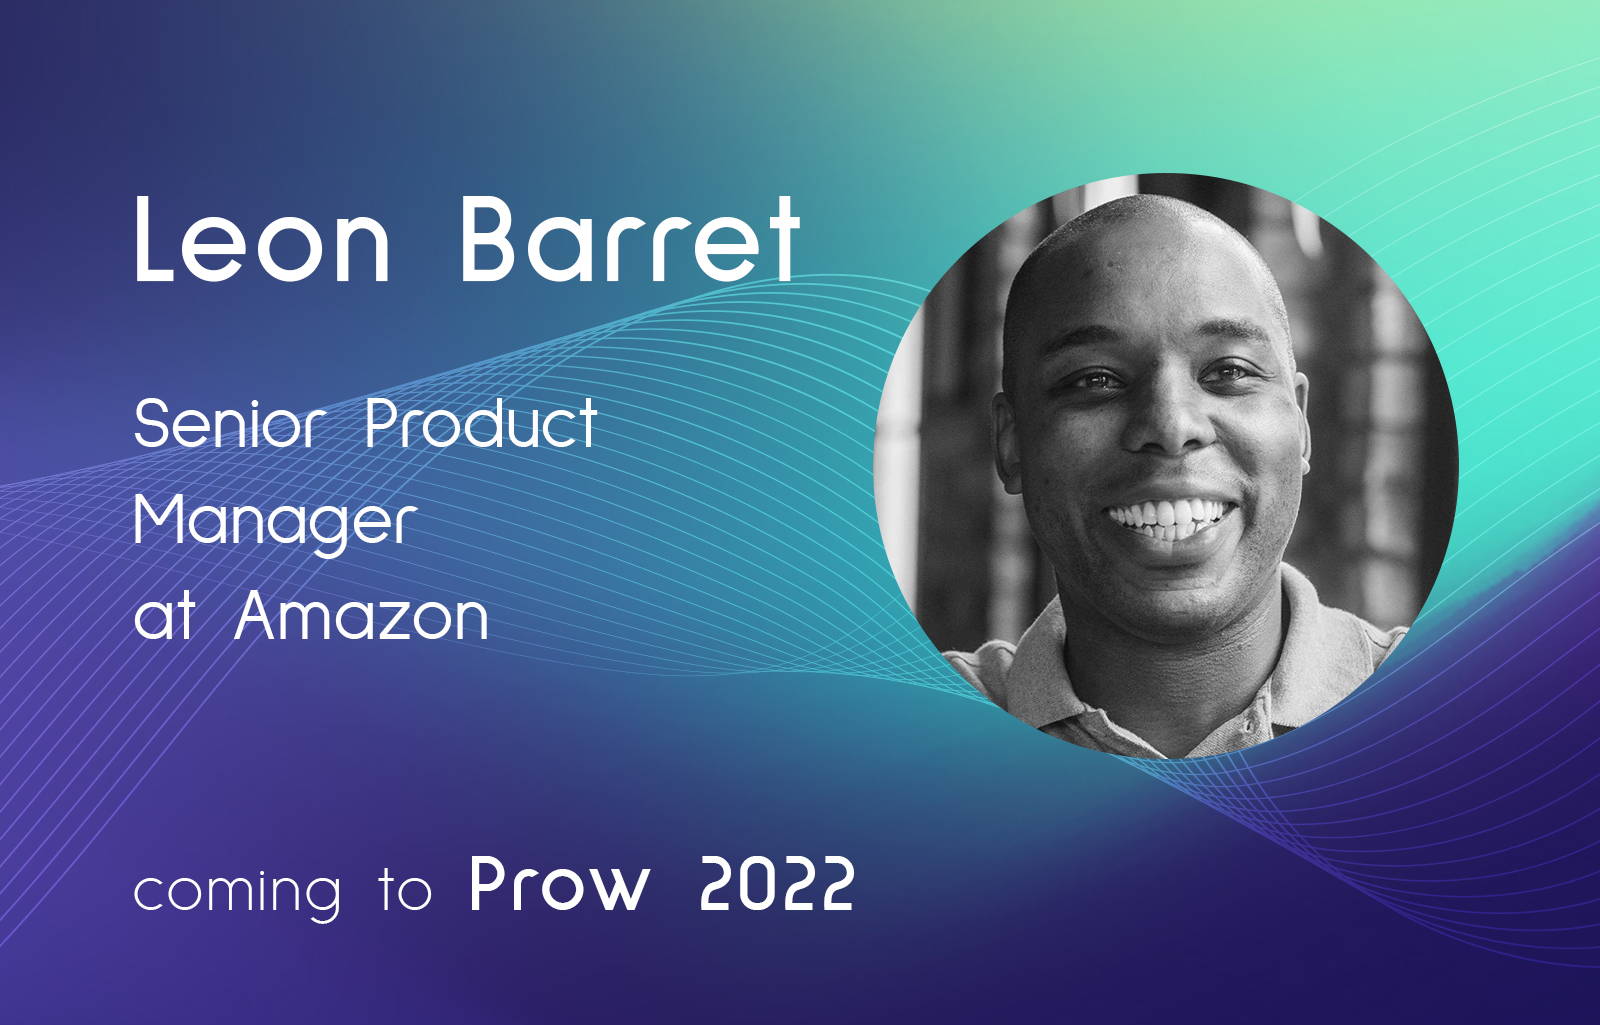 Leon Barret, Senior Product Manager, Devices at Amazon, is speaking at Prow 2022 in Timisoara this September